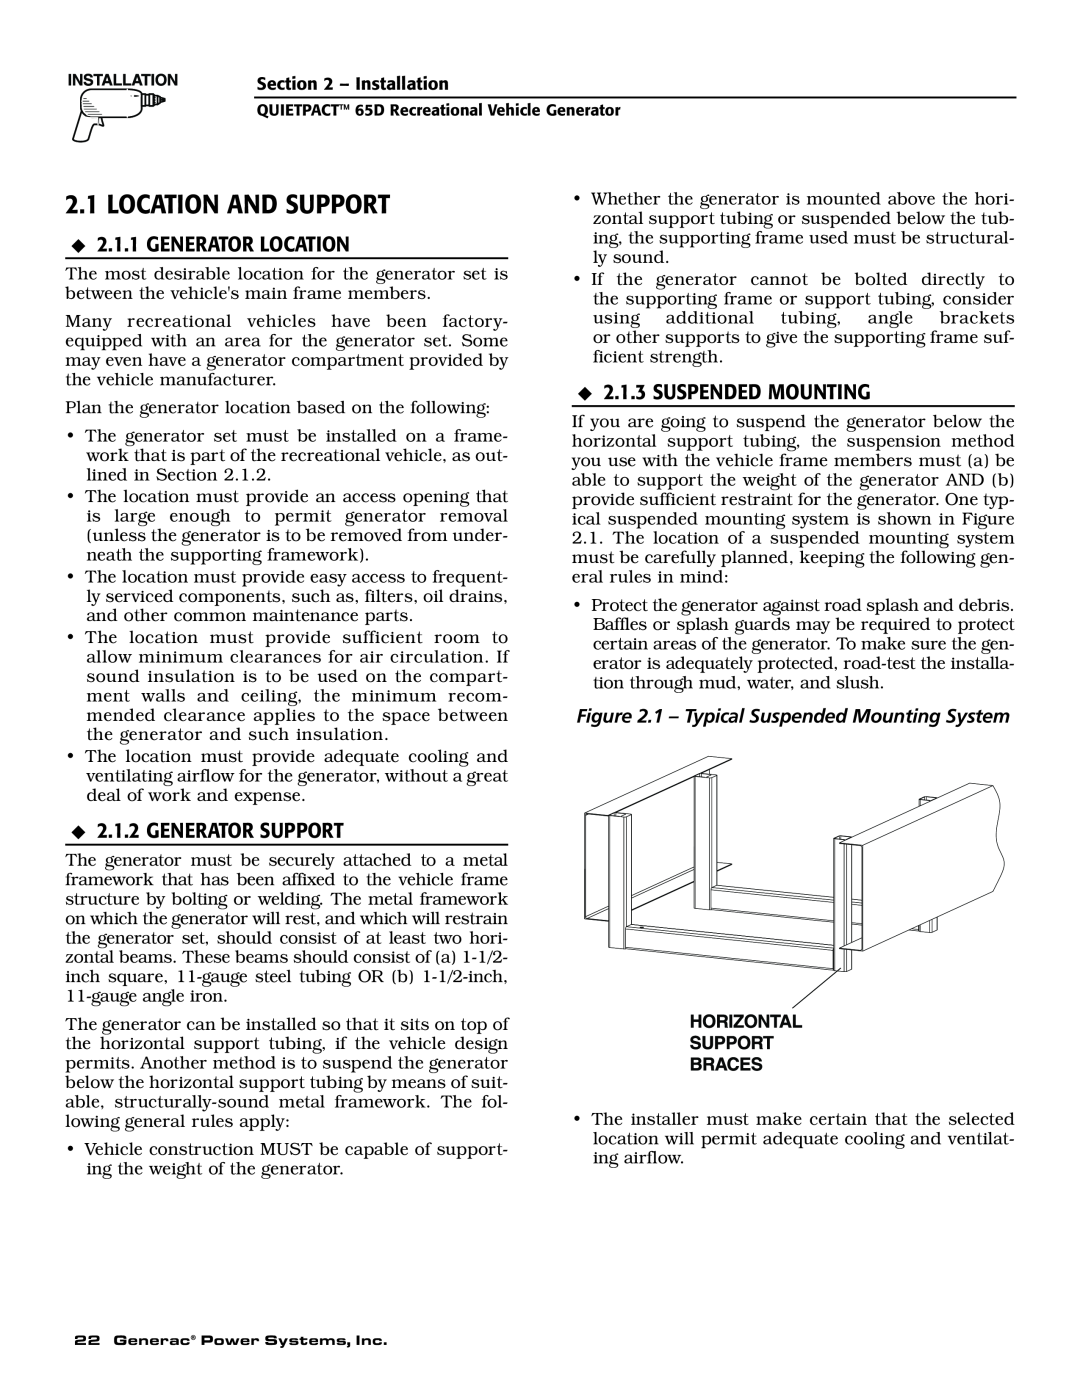 Generac 004614-1 owner manual Location And Support, Generator Location, Generator Support, Suspended Mounting 